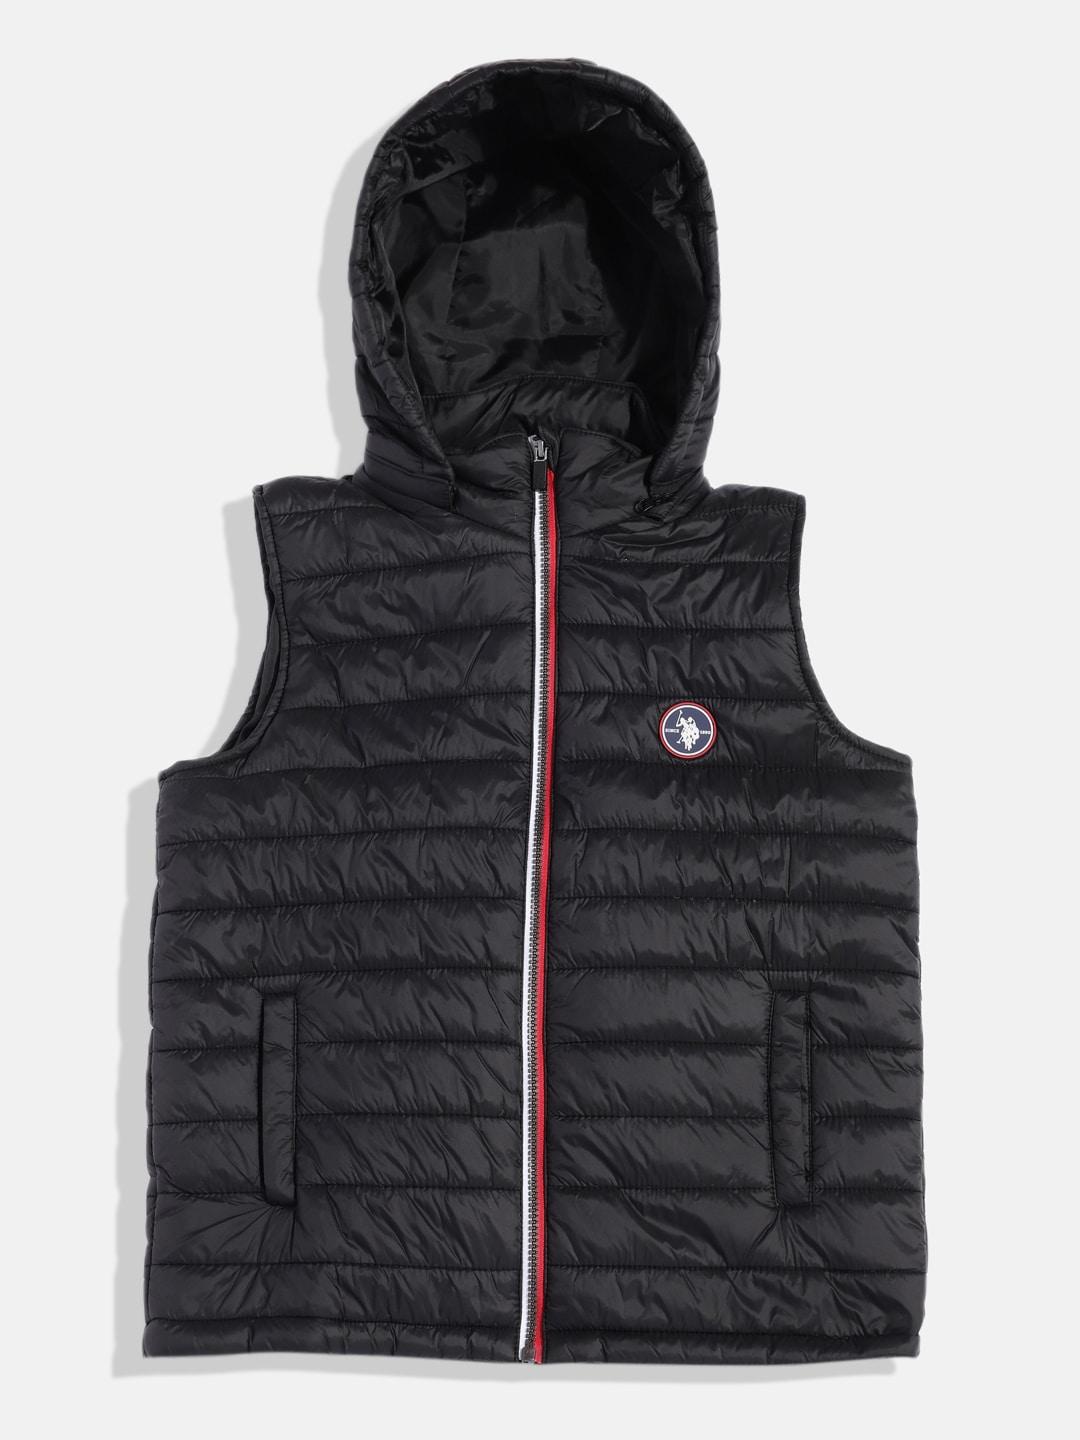 U.S. Polo Assn. Kids Boys Solid Hooded Gilet Puffer Jacket With Brand Logo Applique Detail